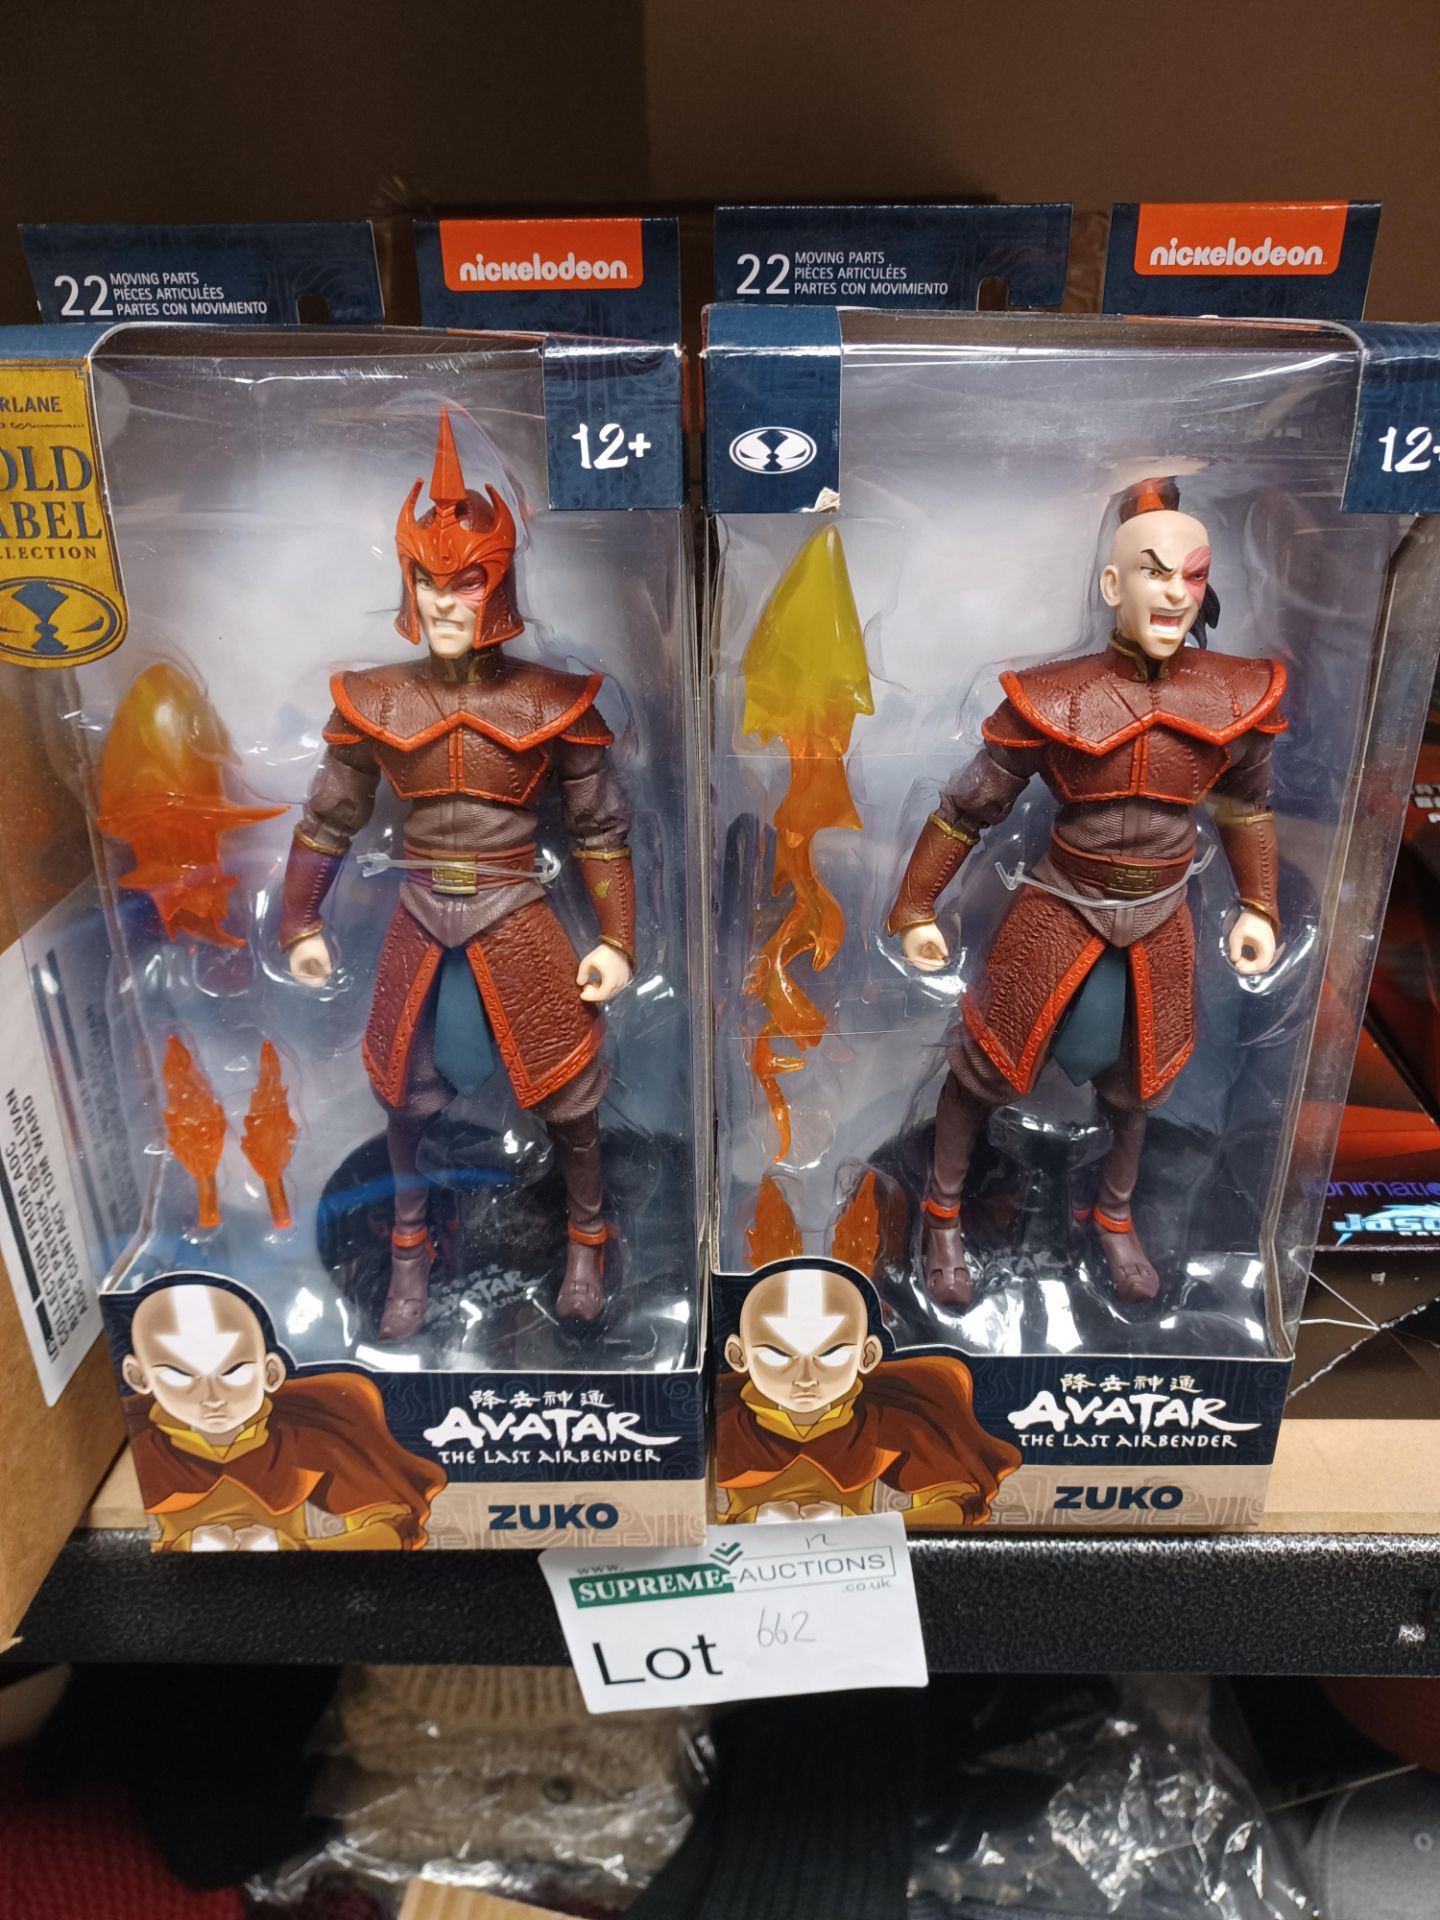 12 X AVATAR THE LAST AIRBENDER COLLECTIBLE FIGURES IN DIFFERENT COSTUMES - EBR